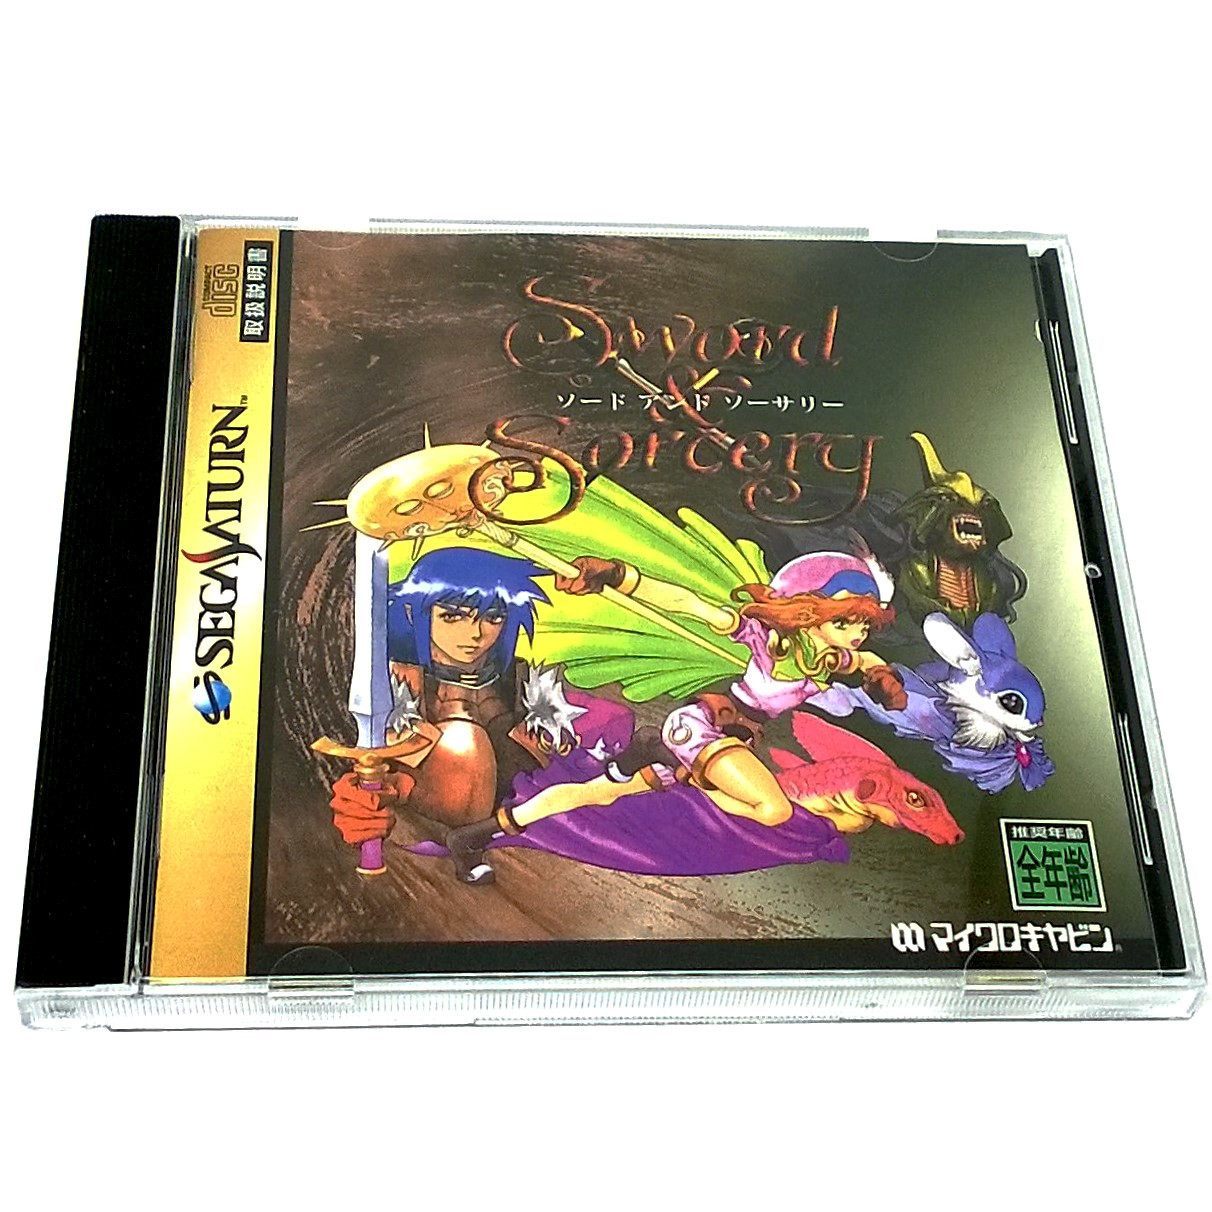 Sword & Sorcery for Saturn (Import) - Front of case